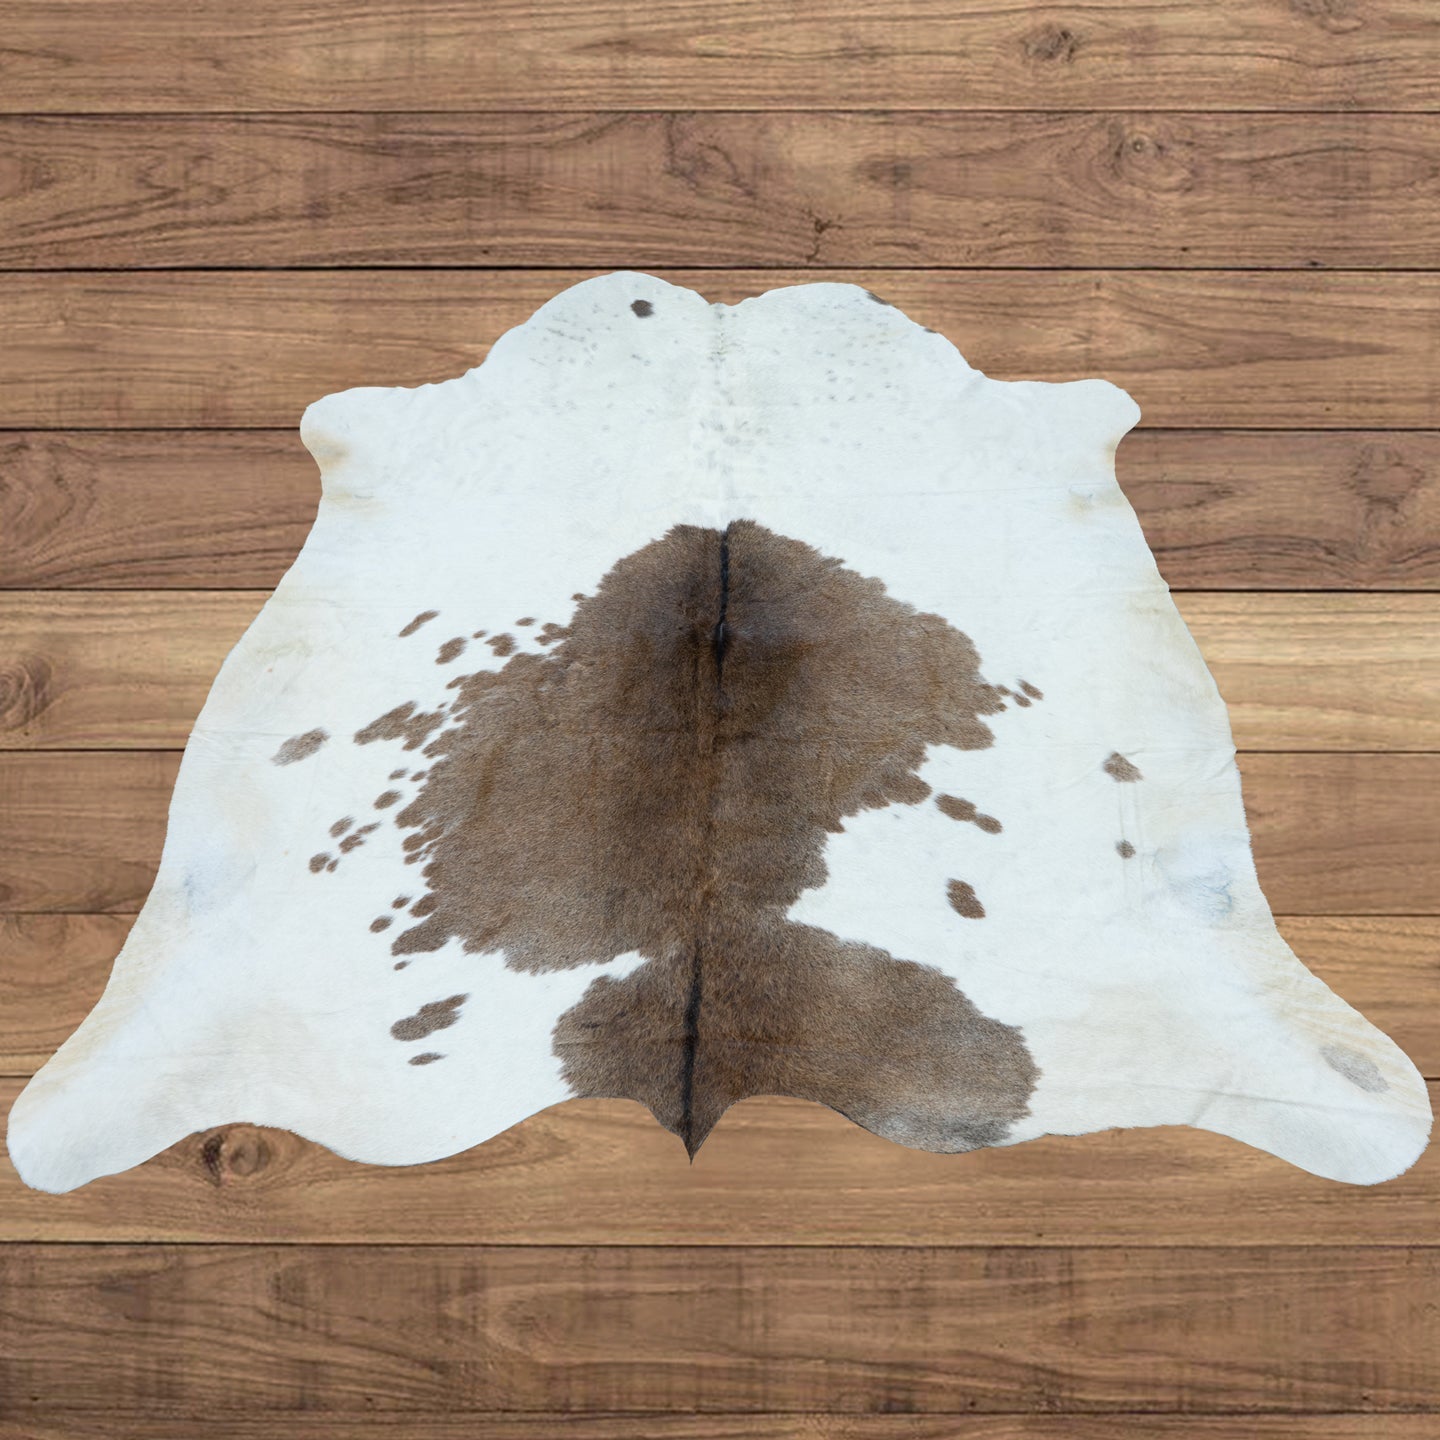 Large RODEO exotic cowhide rug 6 x 6 ft-- -4210 - Rodeo Cowhide Rugs